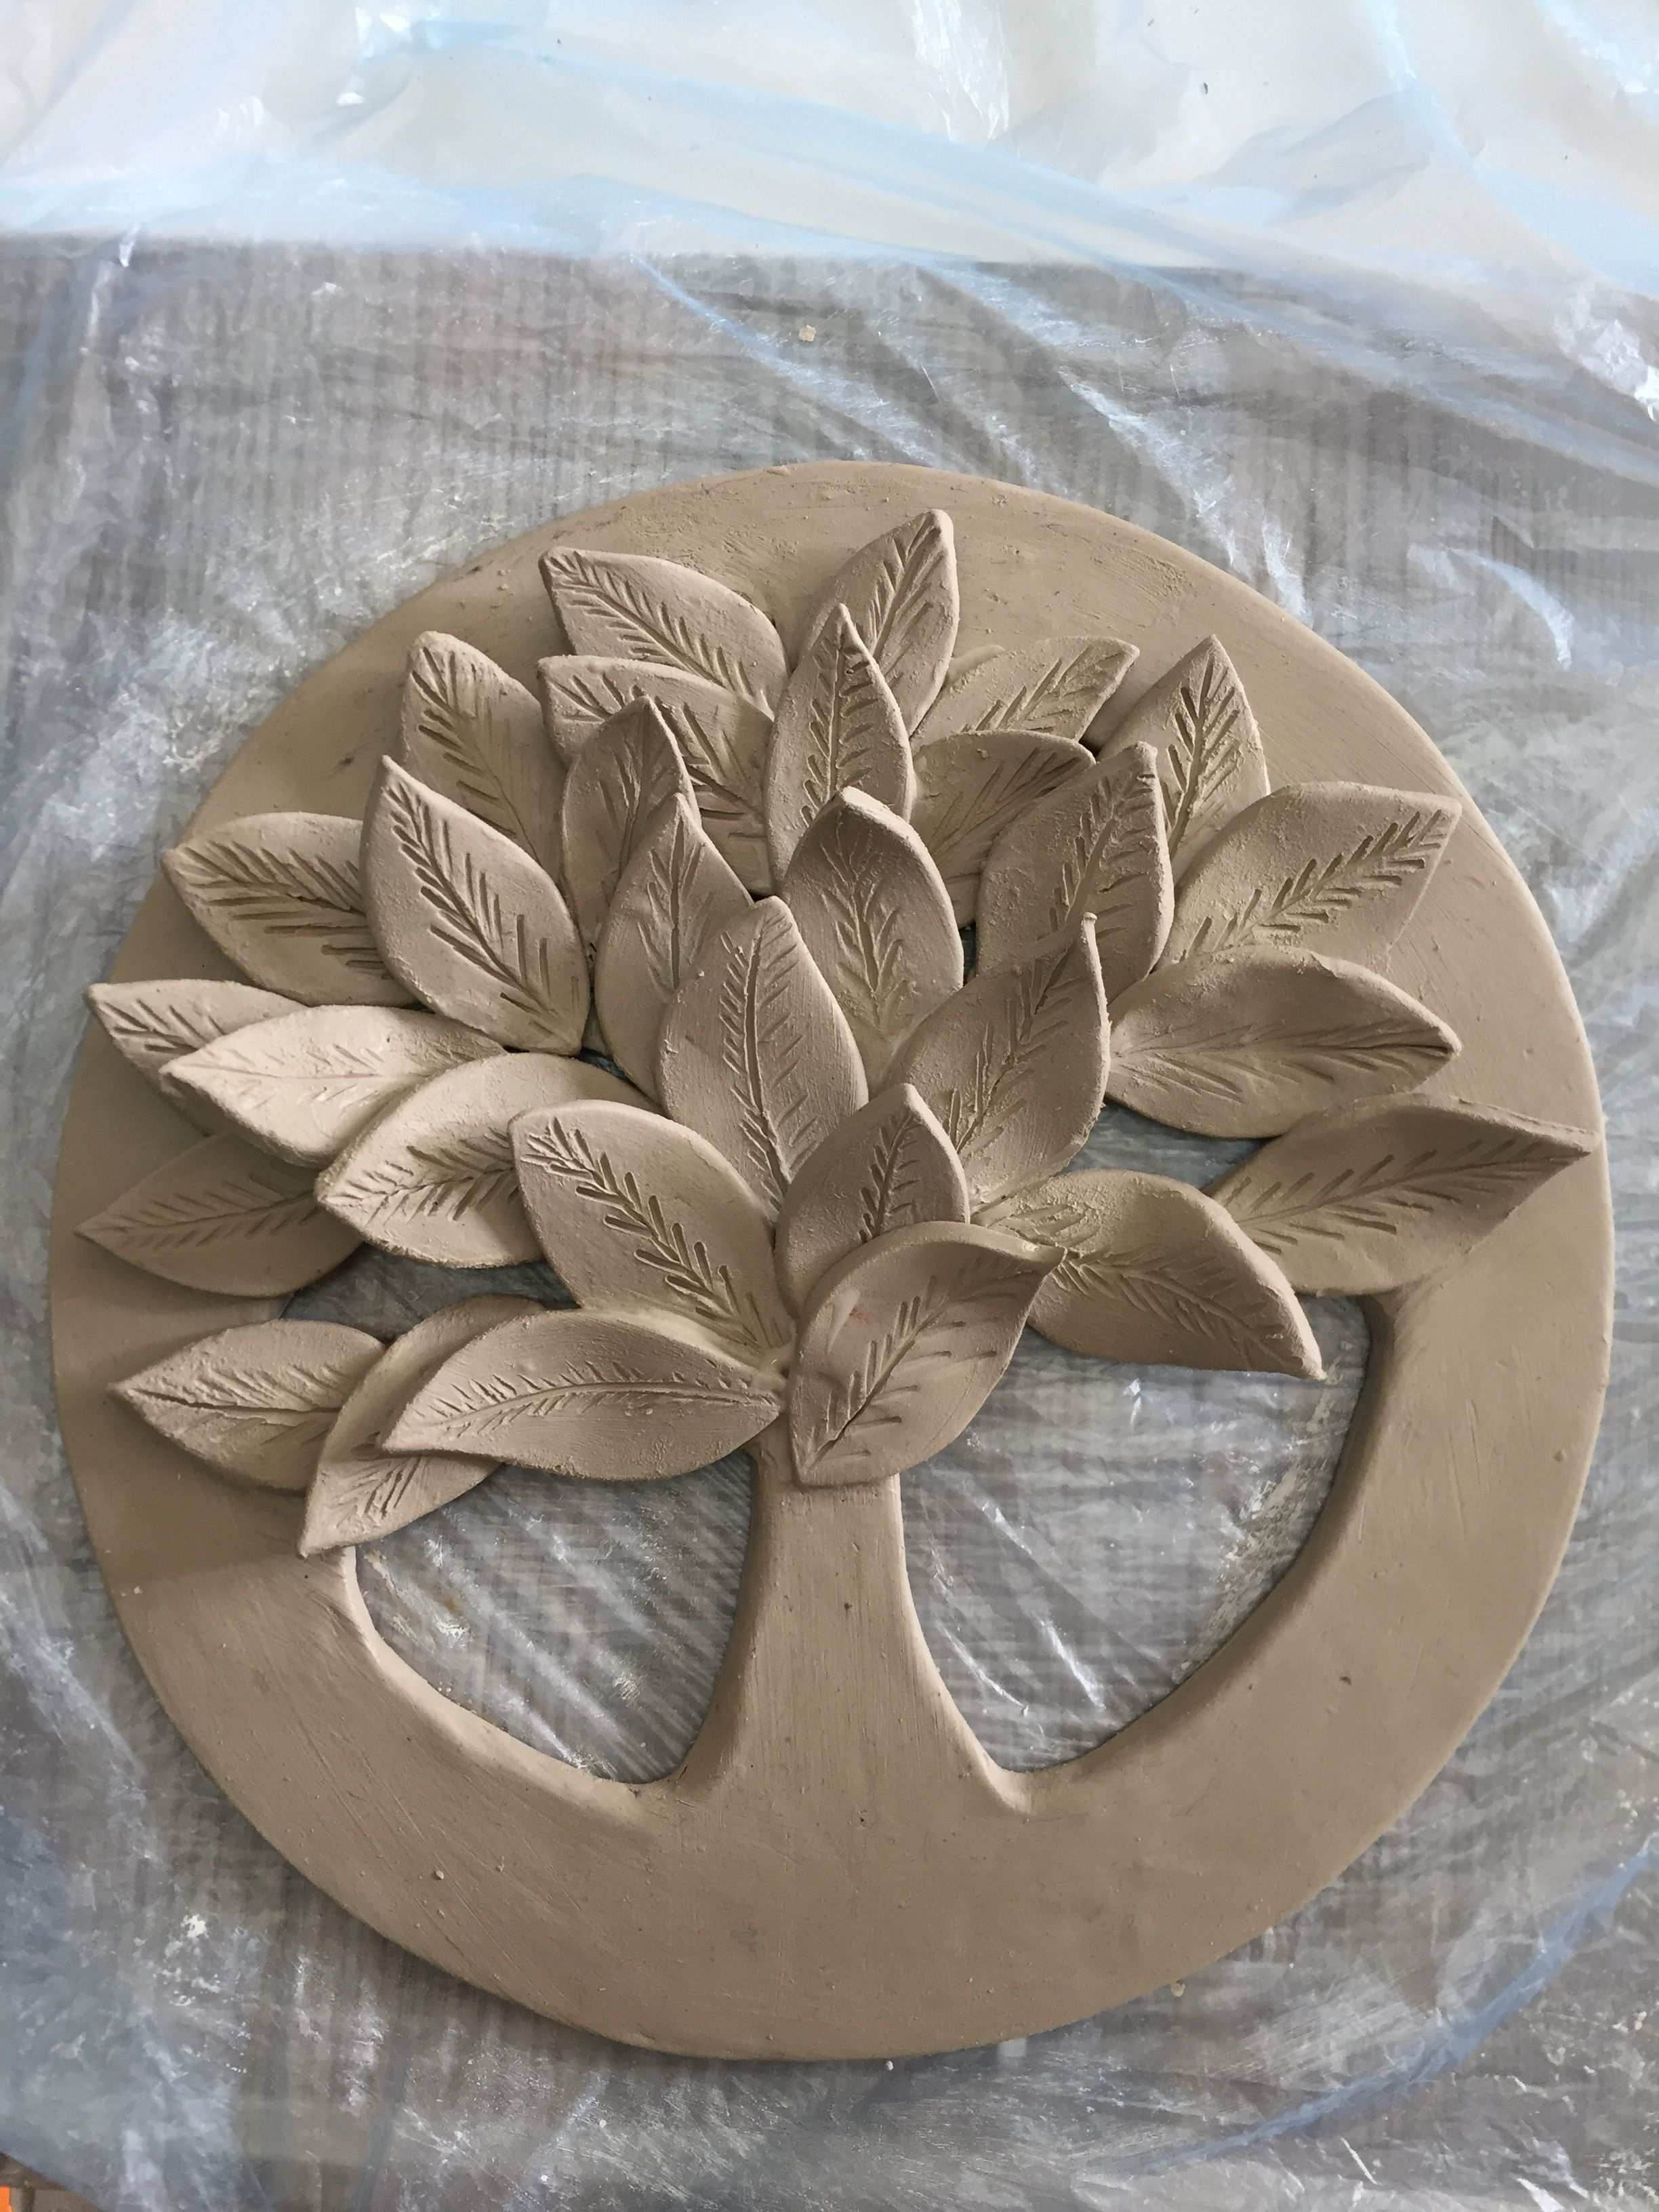 Ceramic Here But Would Be Beautiful As A Crust For Either A Sweet Or Savory Pie 3 Clay Art Projects Pottery Handbuilding Clay Wall Art